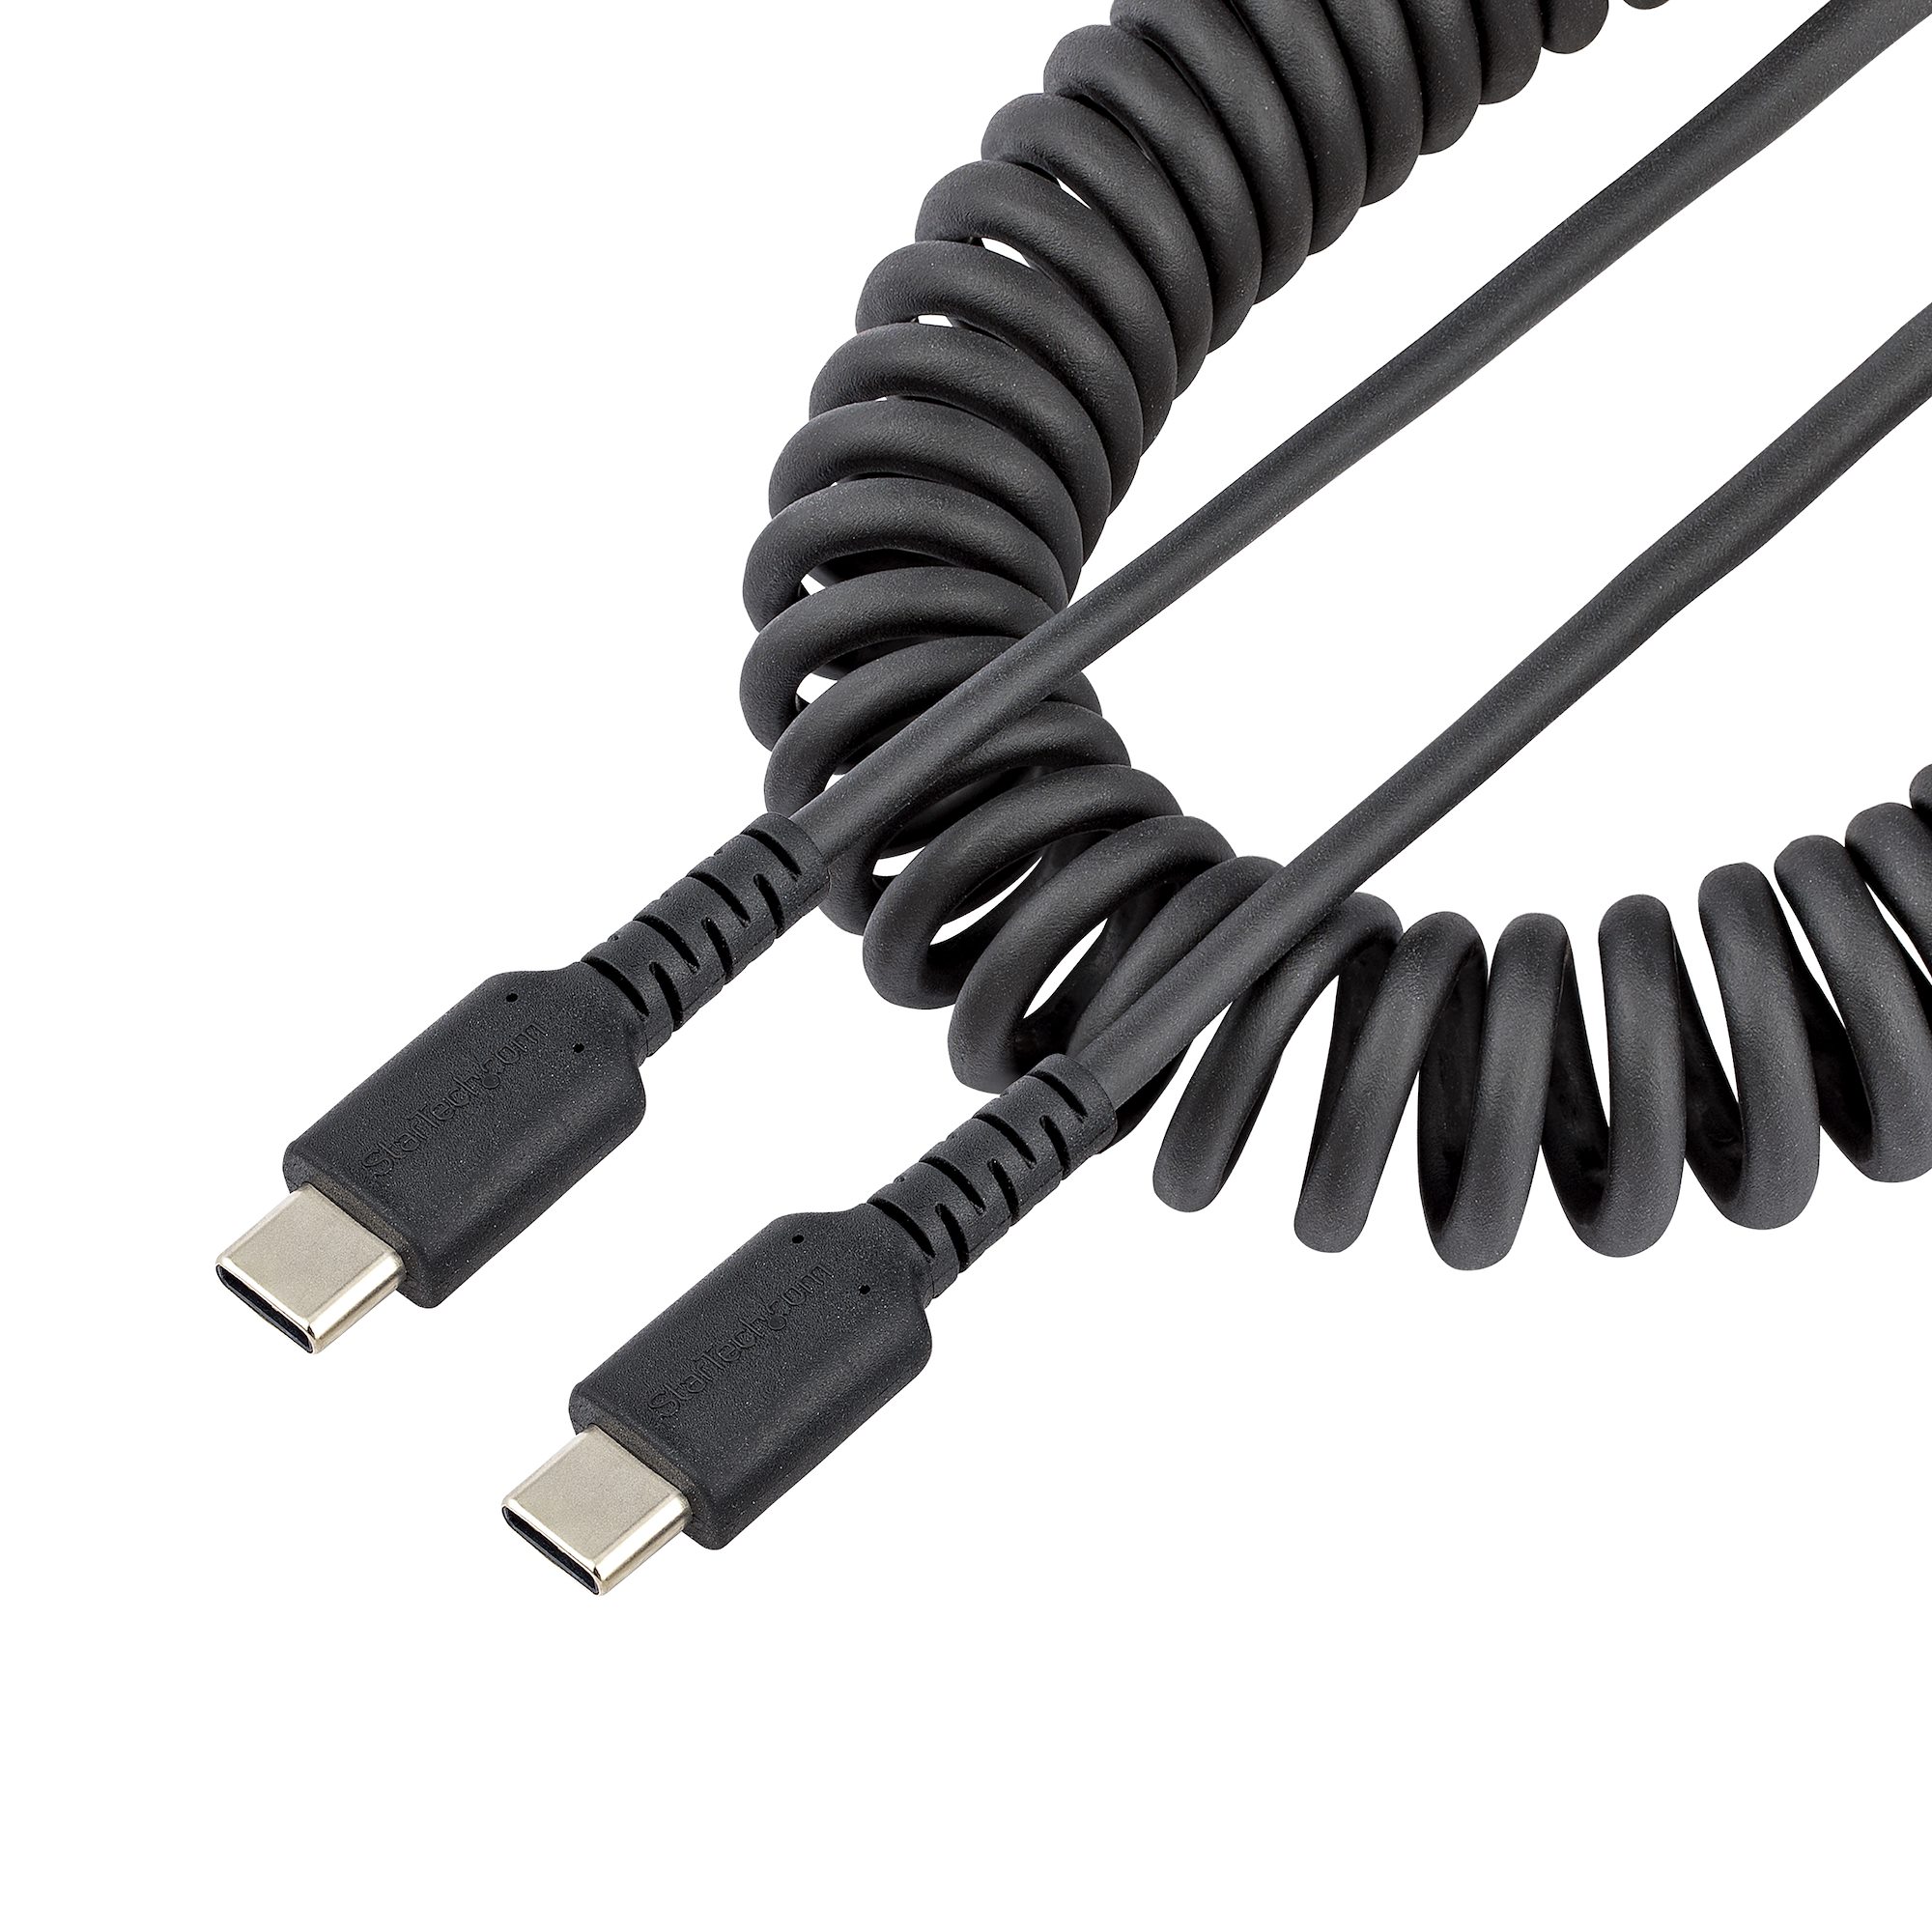 20in (50cm) USB C Charging Cable, Coiled Heavy Duty Fast Charge & Sync  USB-C Cable, USB 2.0 Type-C Cable, Rugged Aramid Fiber, Durable Male to  Male